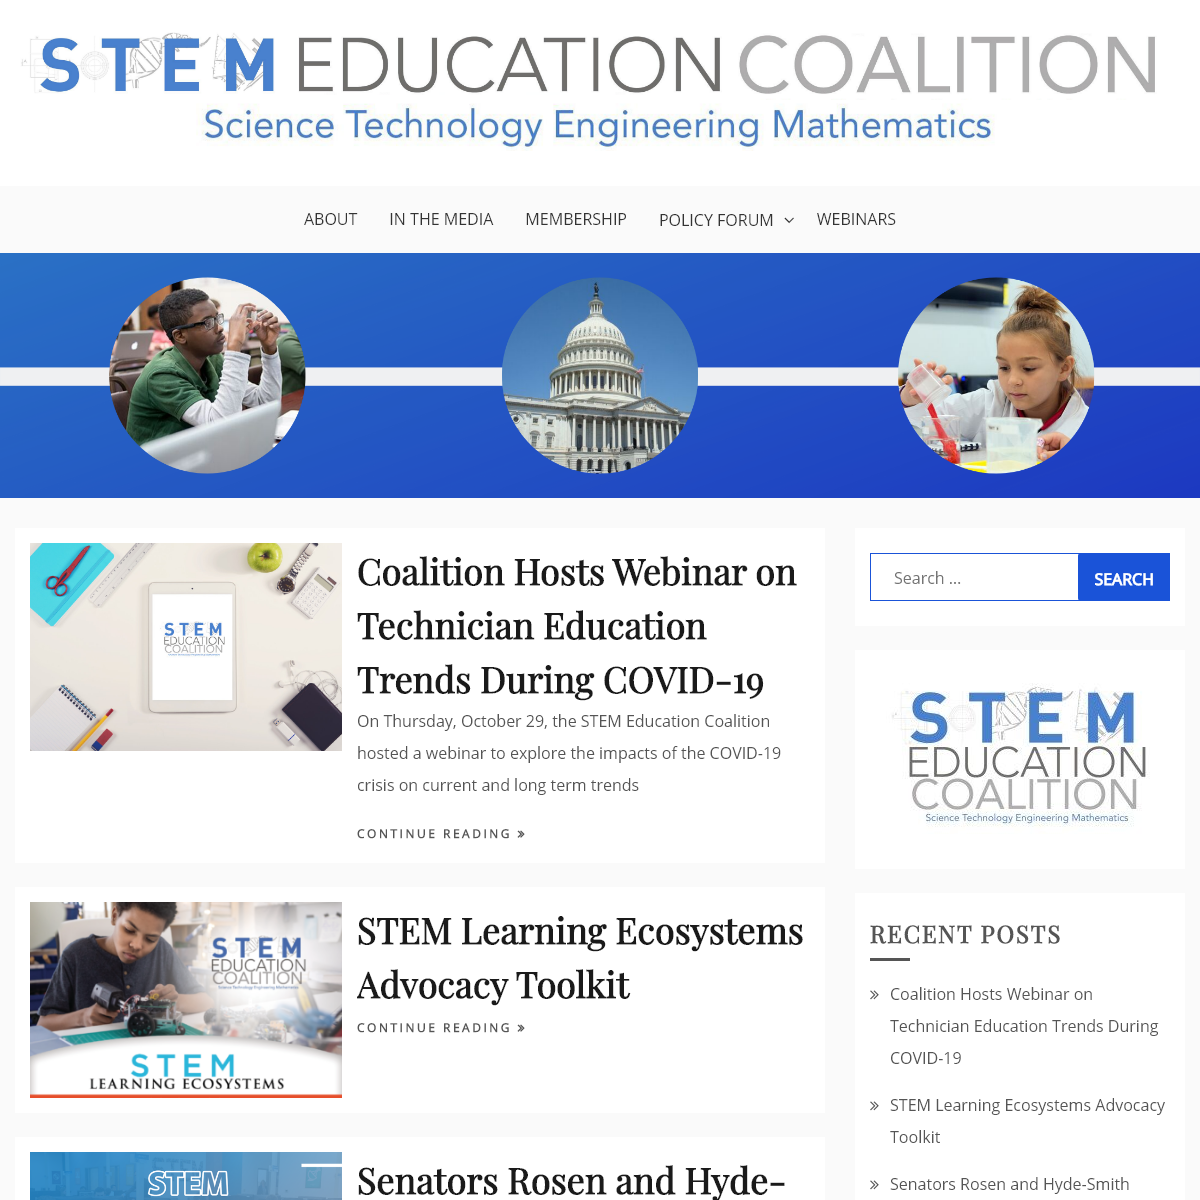 A complete backup of stemedcoalition.org